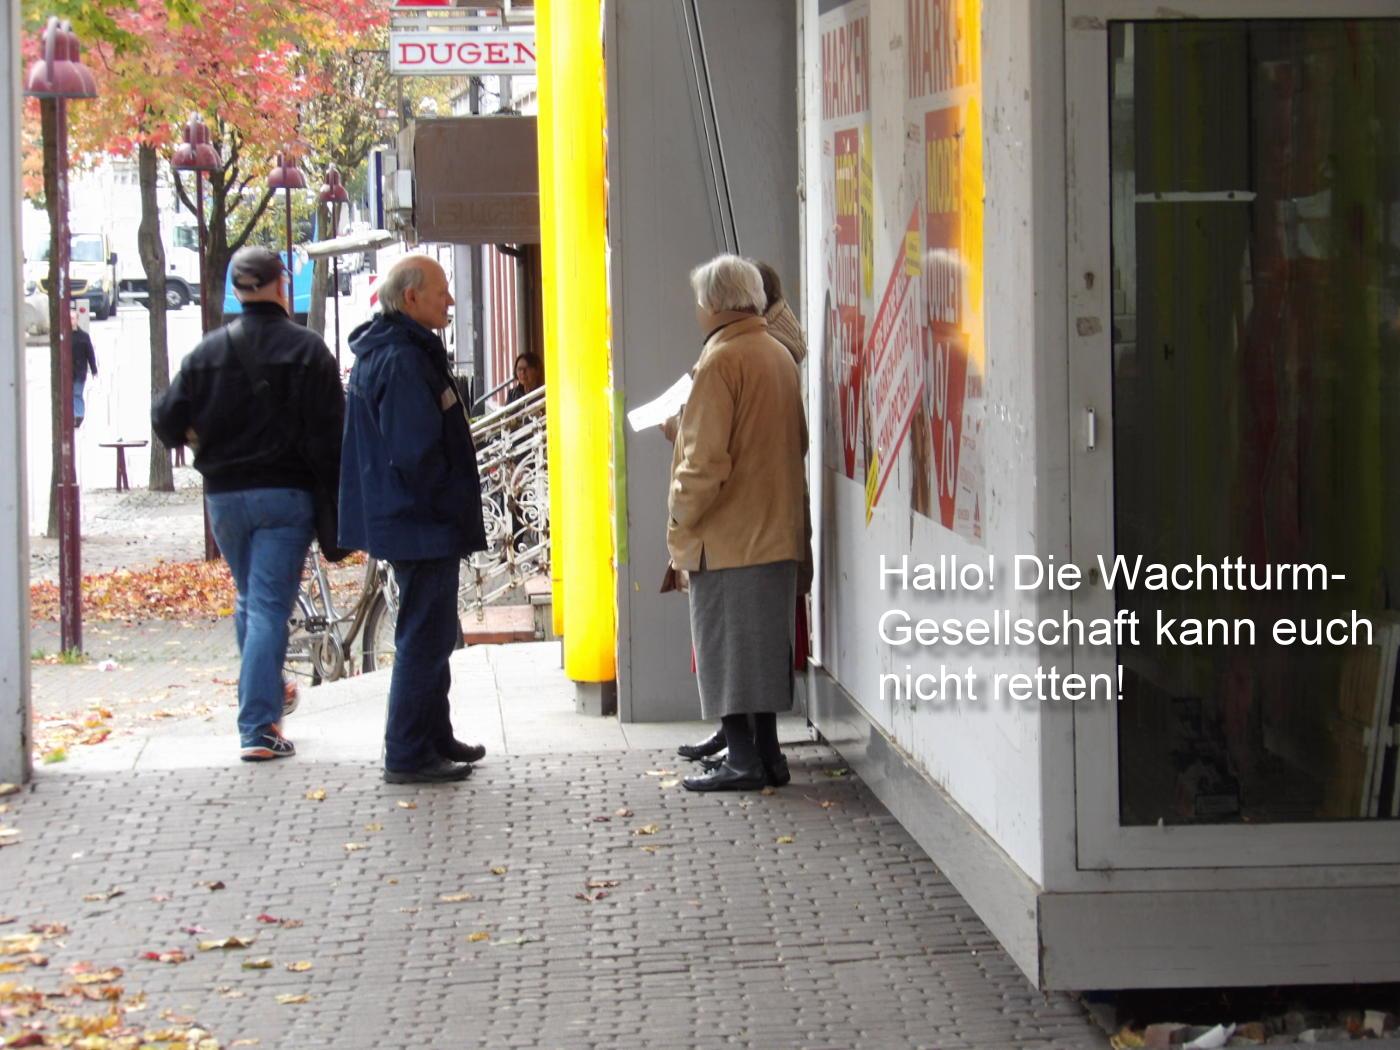 Wiesloch: Jehovah's Witnesses cheat as always